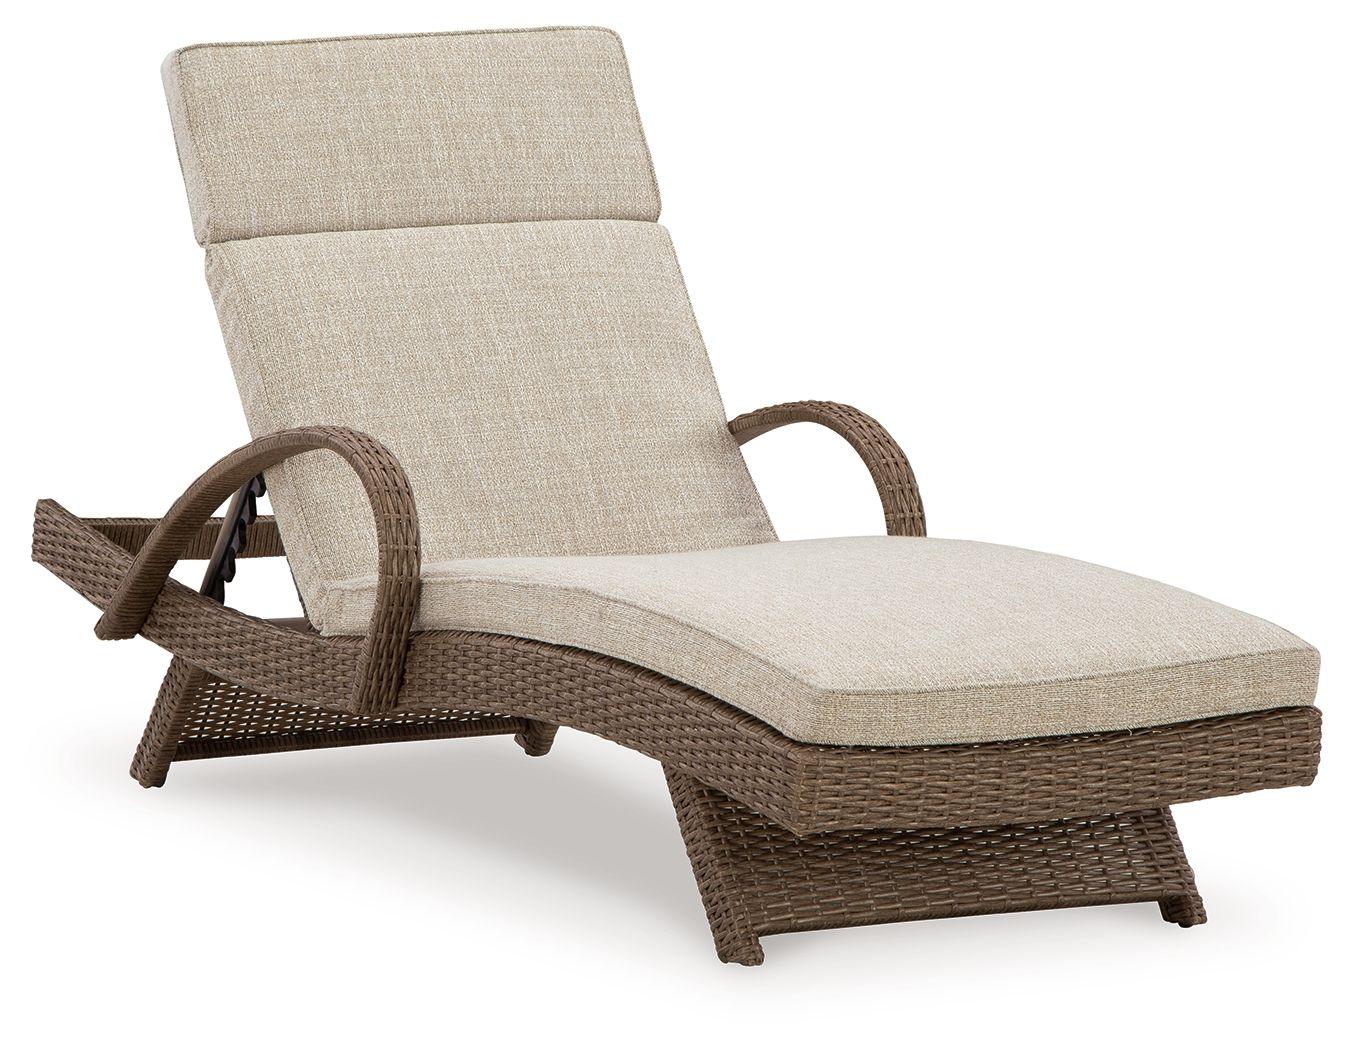 Signature Design by Ashley® - Beachcroft - Beige - Chaise Lounge With Cushion - 5th Avenue Furniture